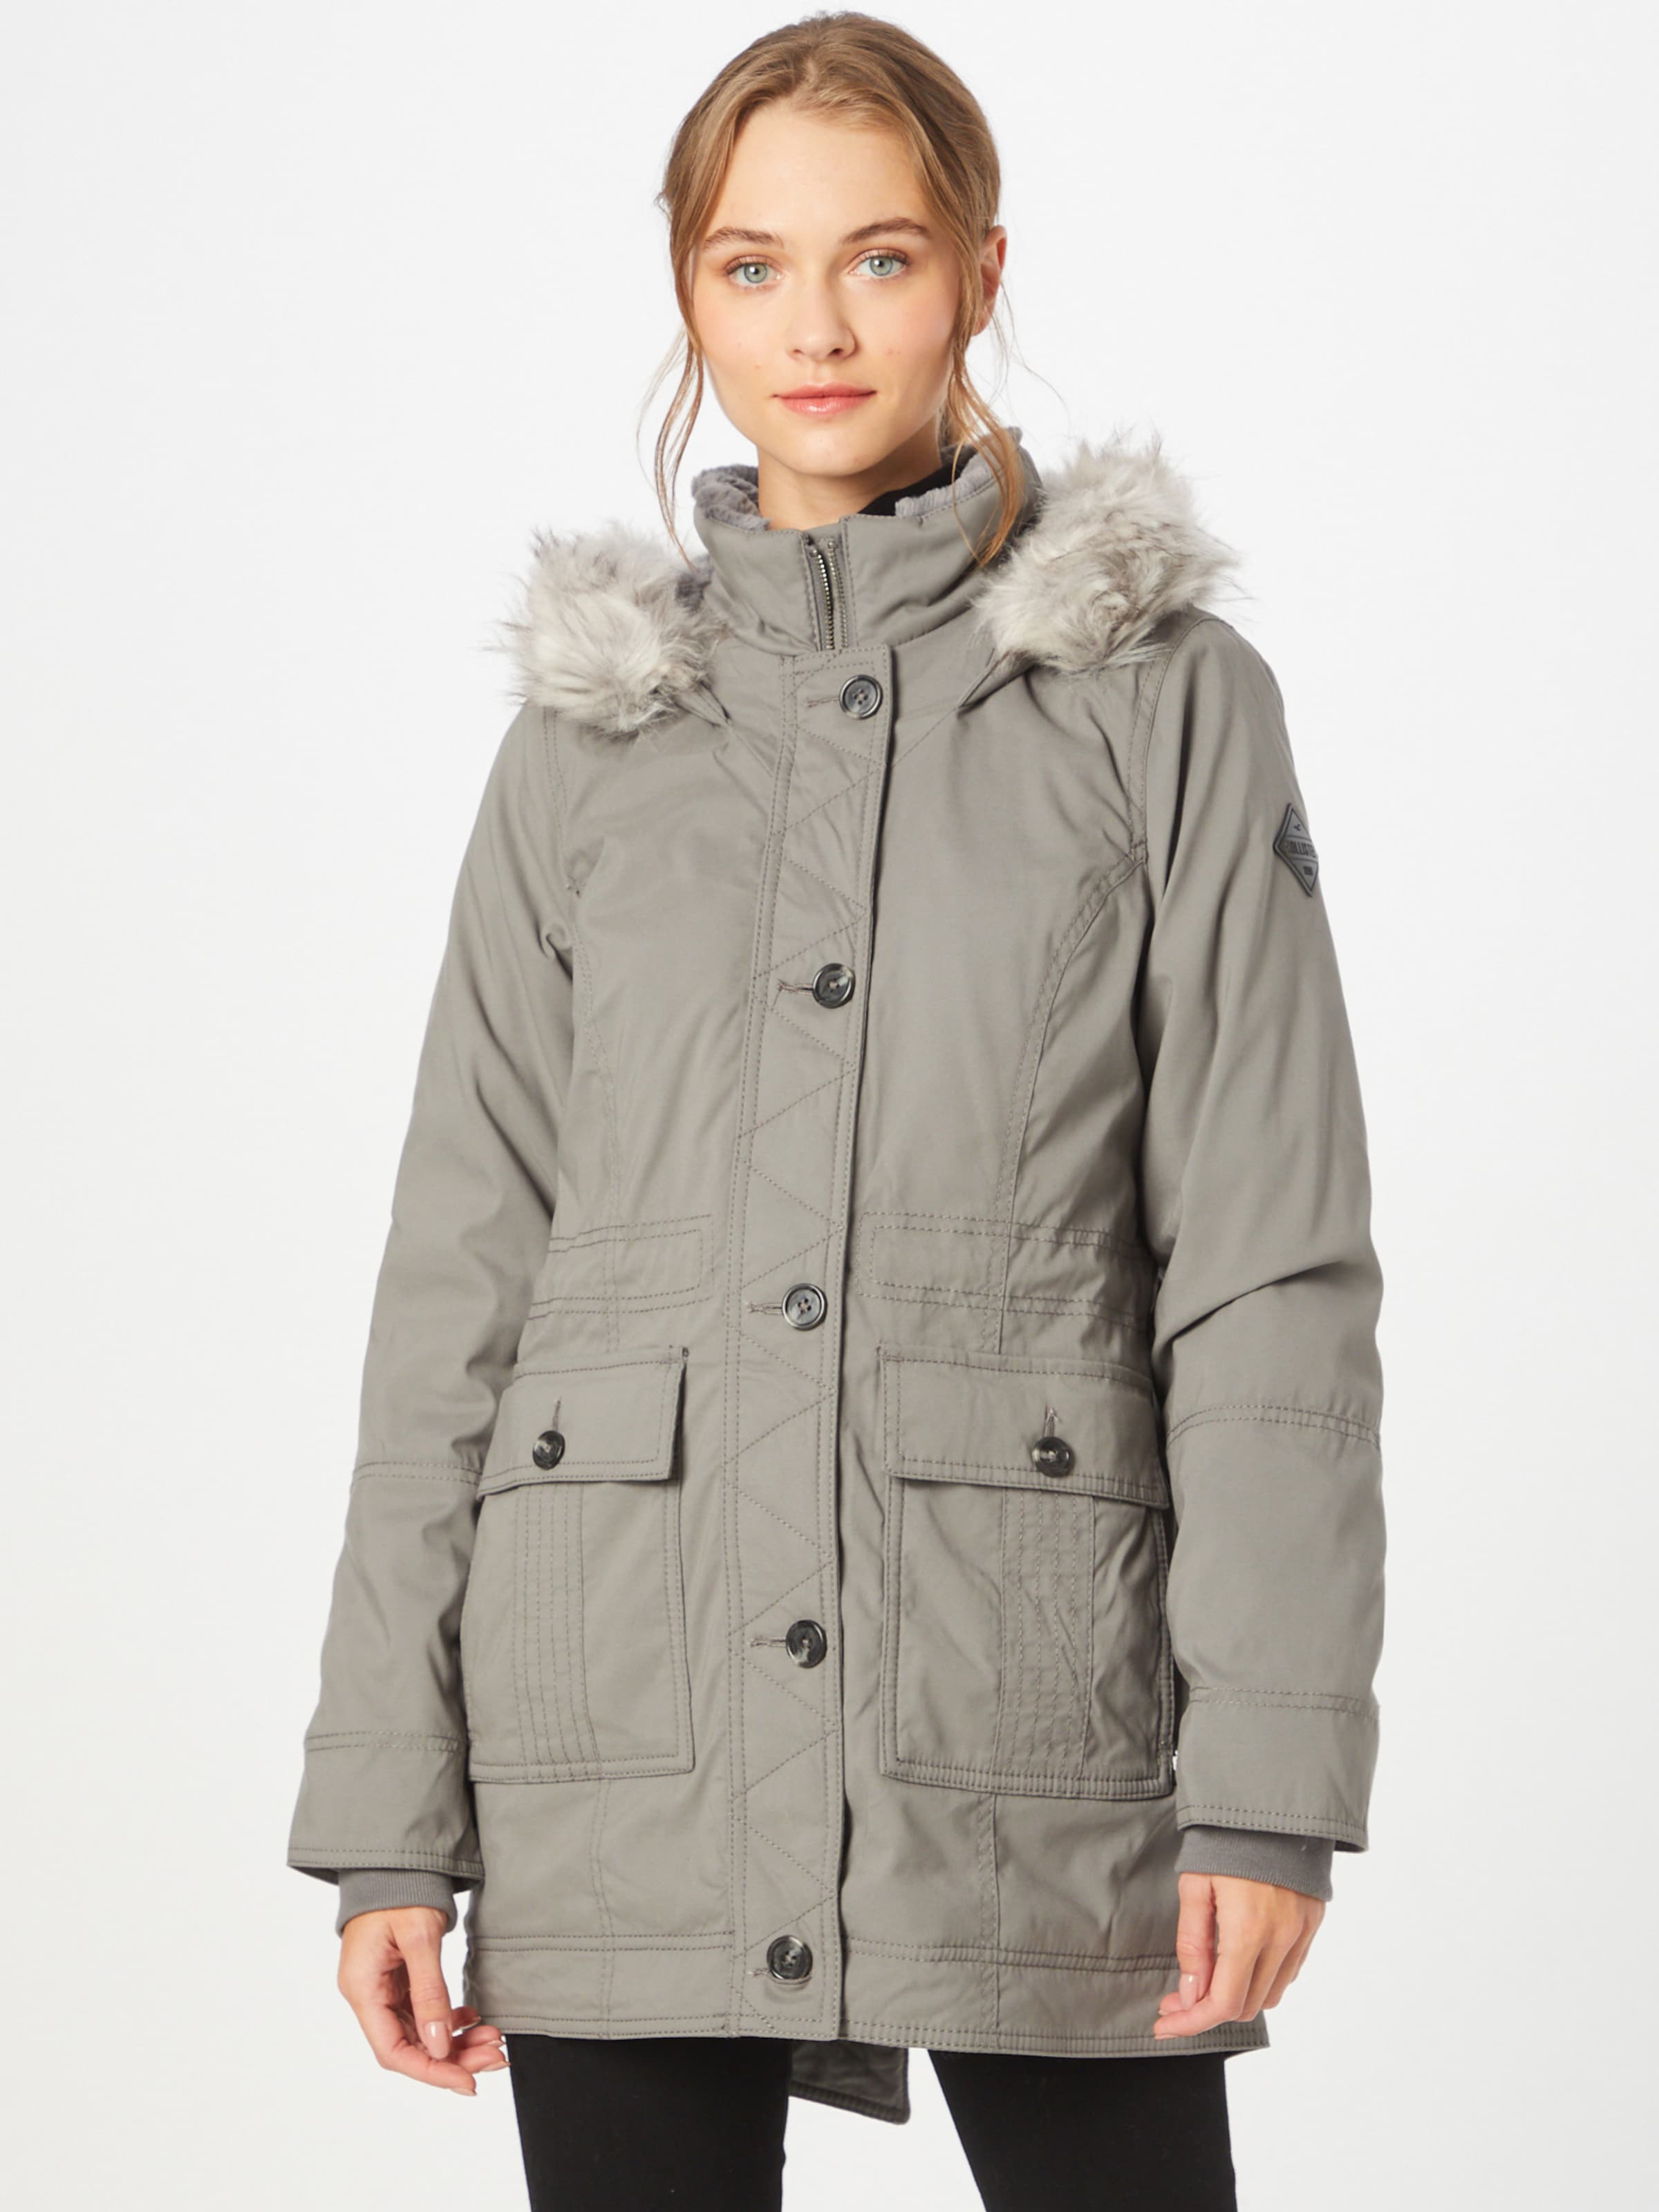 Hollister Teddy Lined Parka Jacket With Faux Fur Hood In Grey for Women